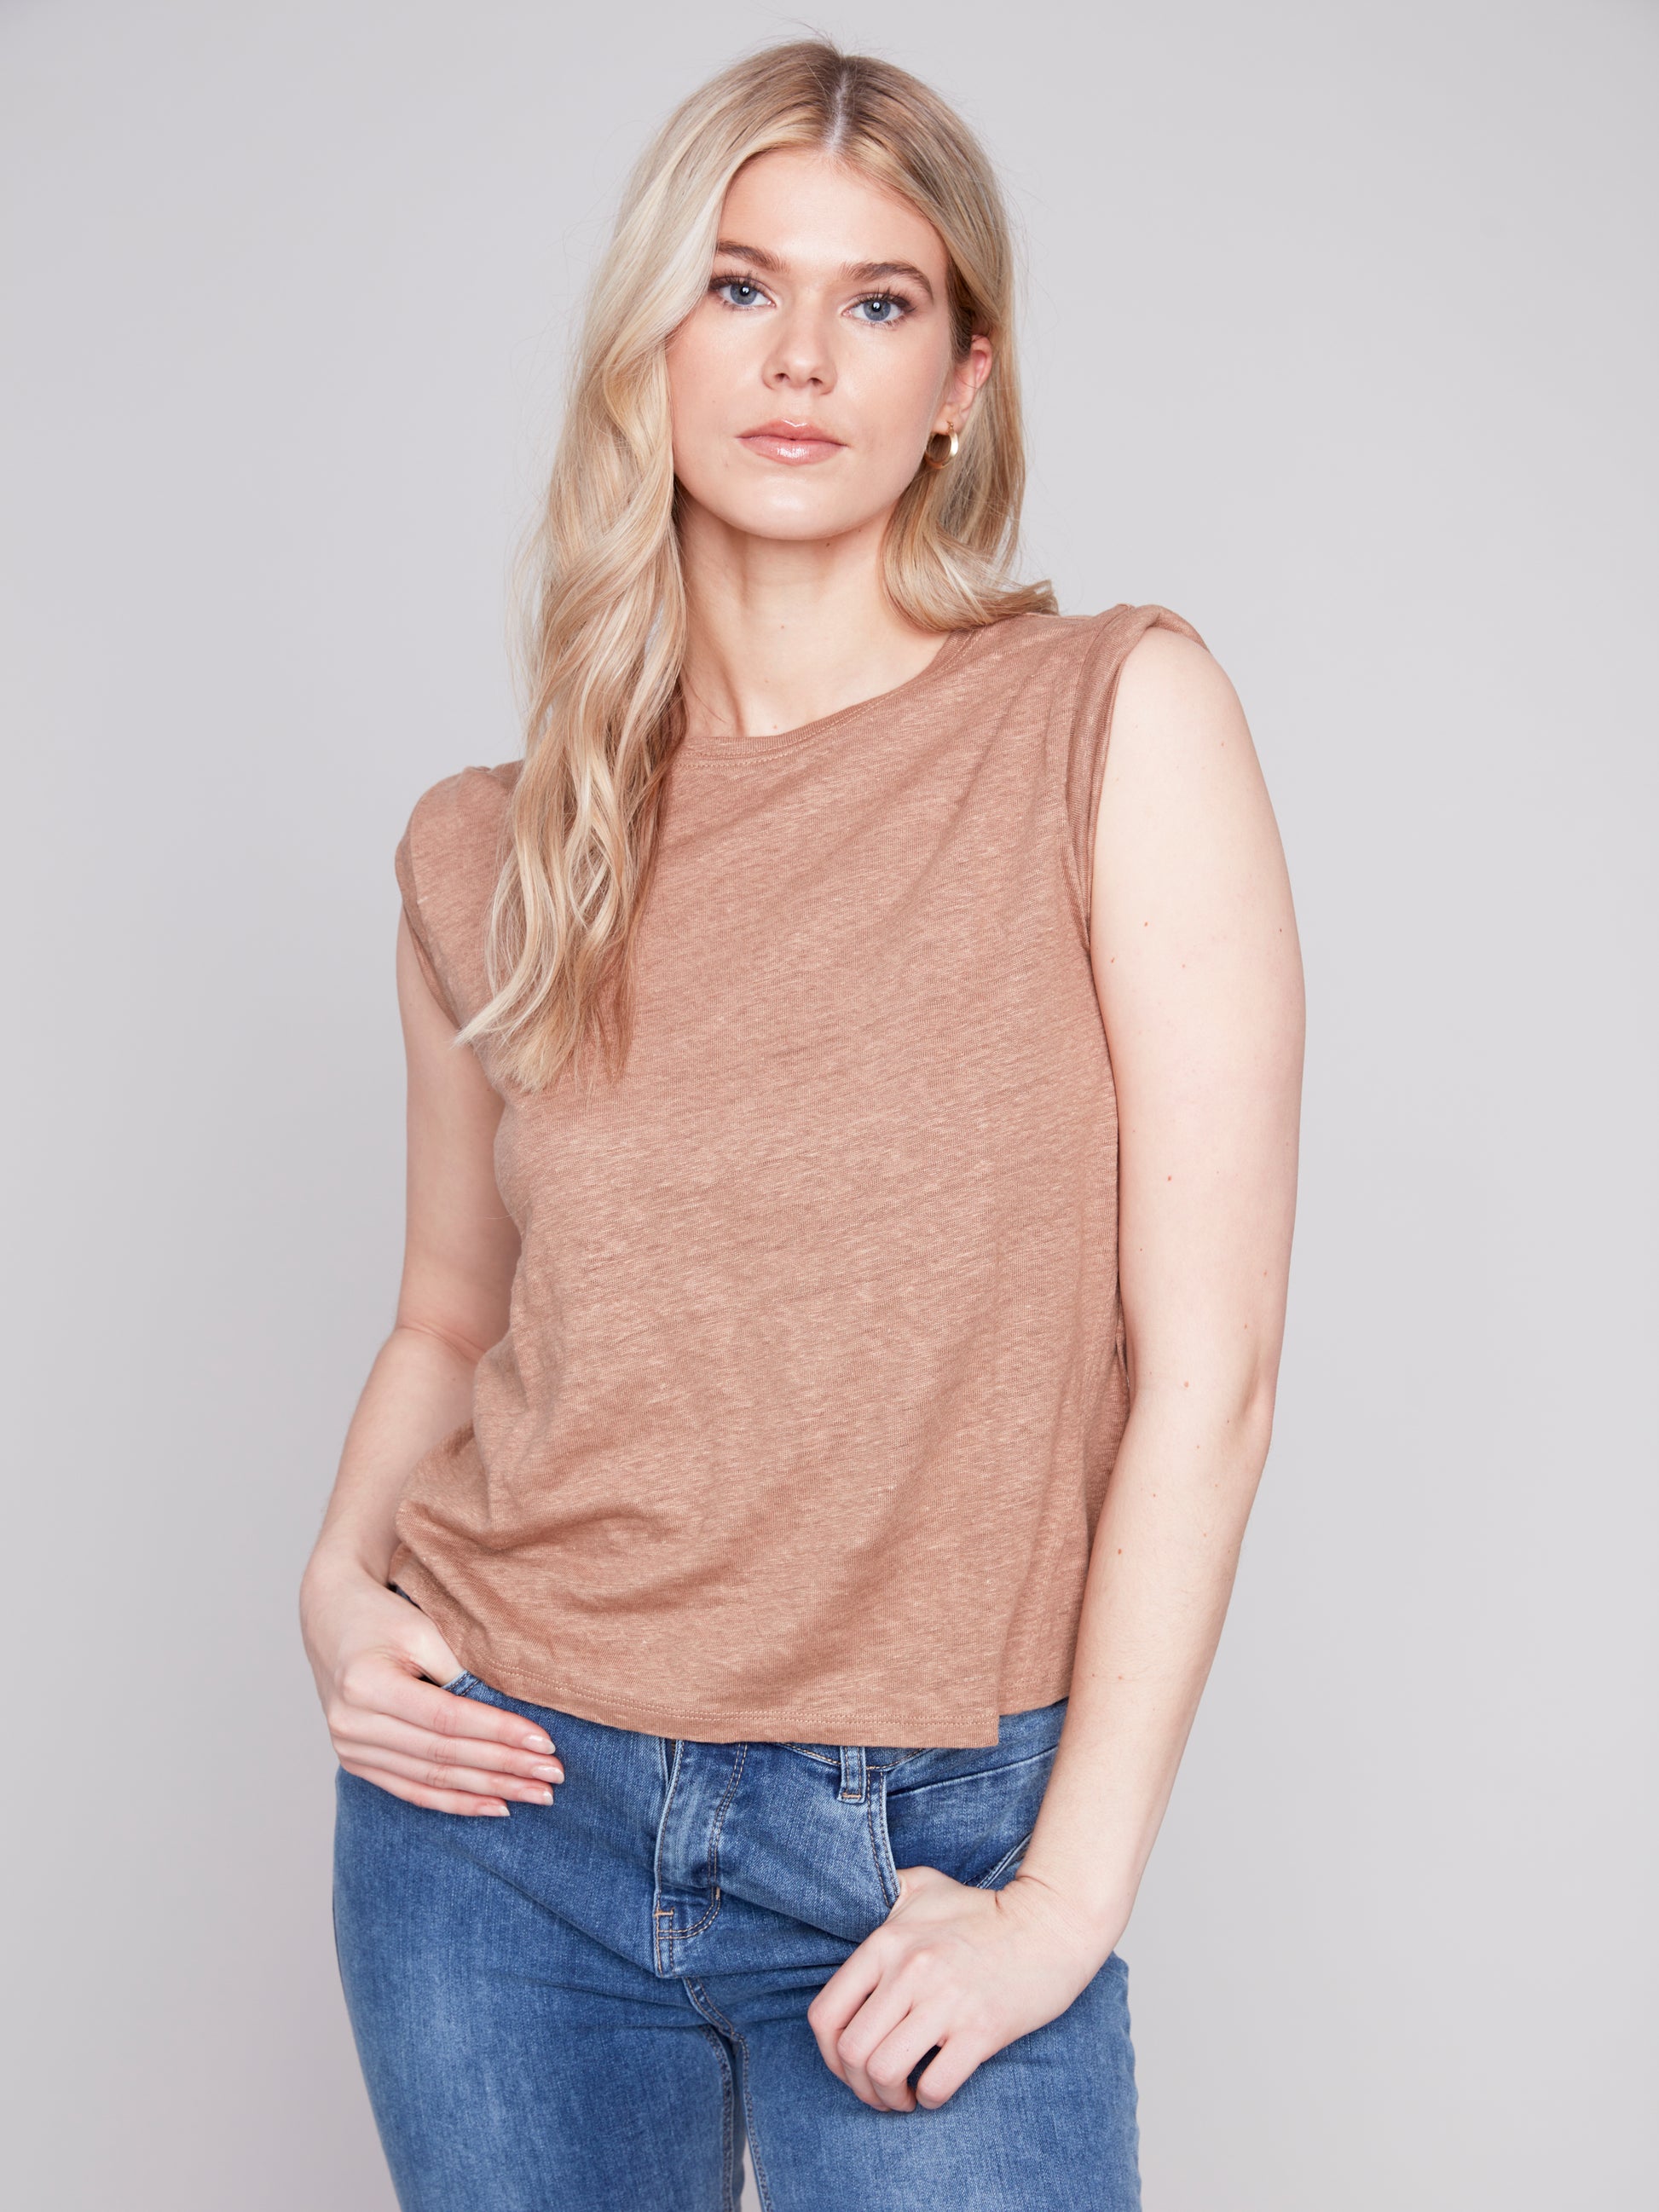 The model is wearing a Caramel Sleeveless Linen Tank by Charlie B and jeans.